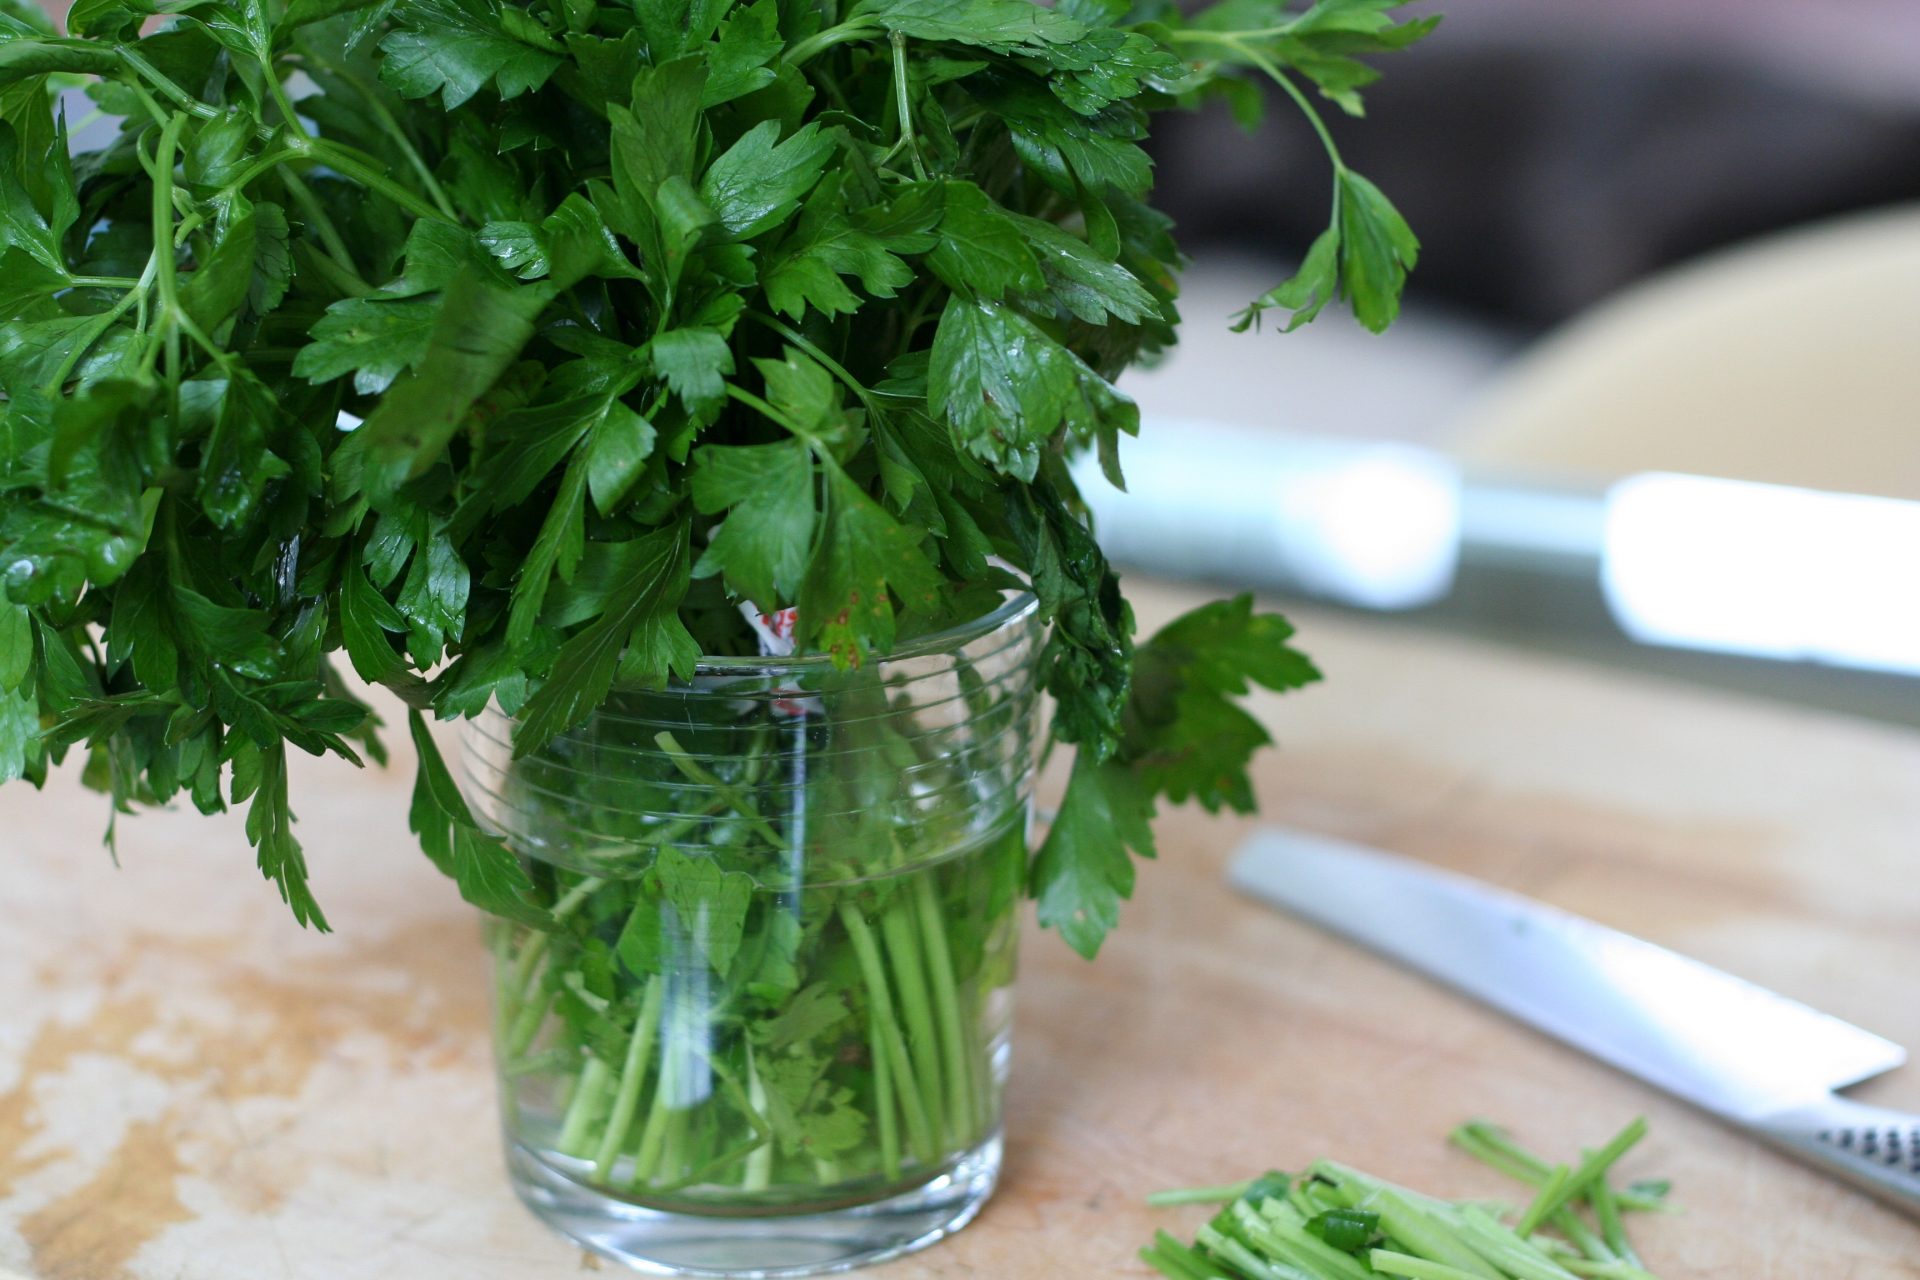 My way of dealing with troublesome acne – Parsley water